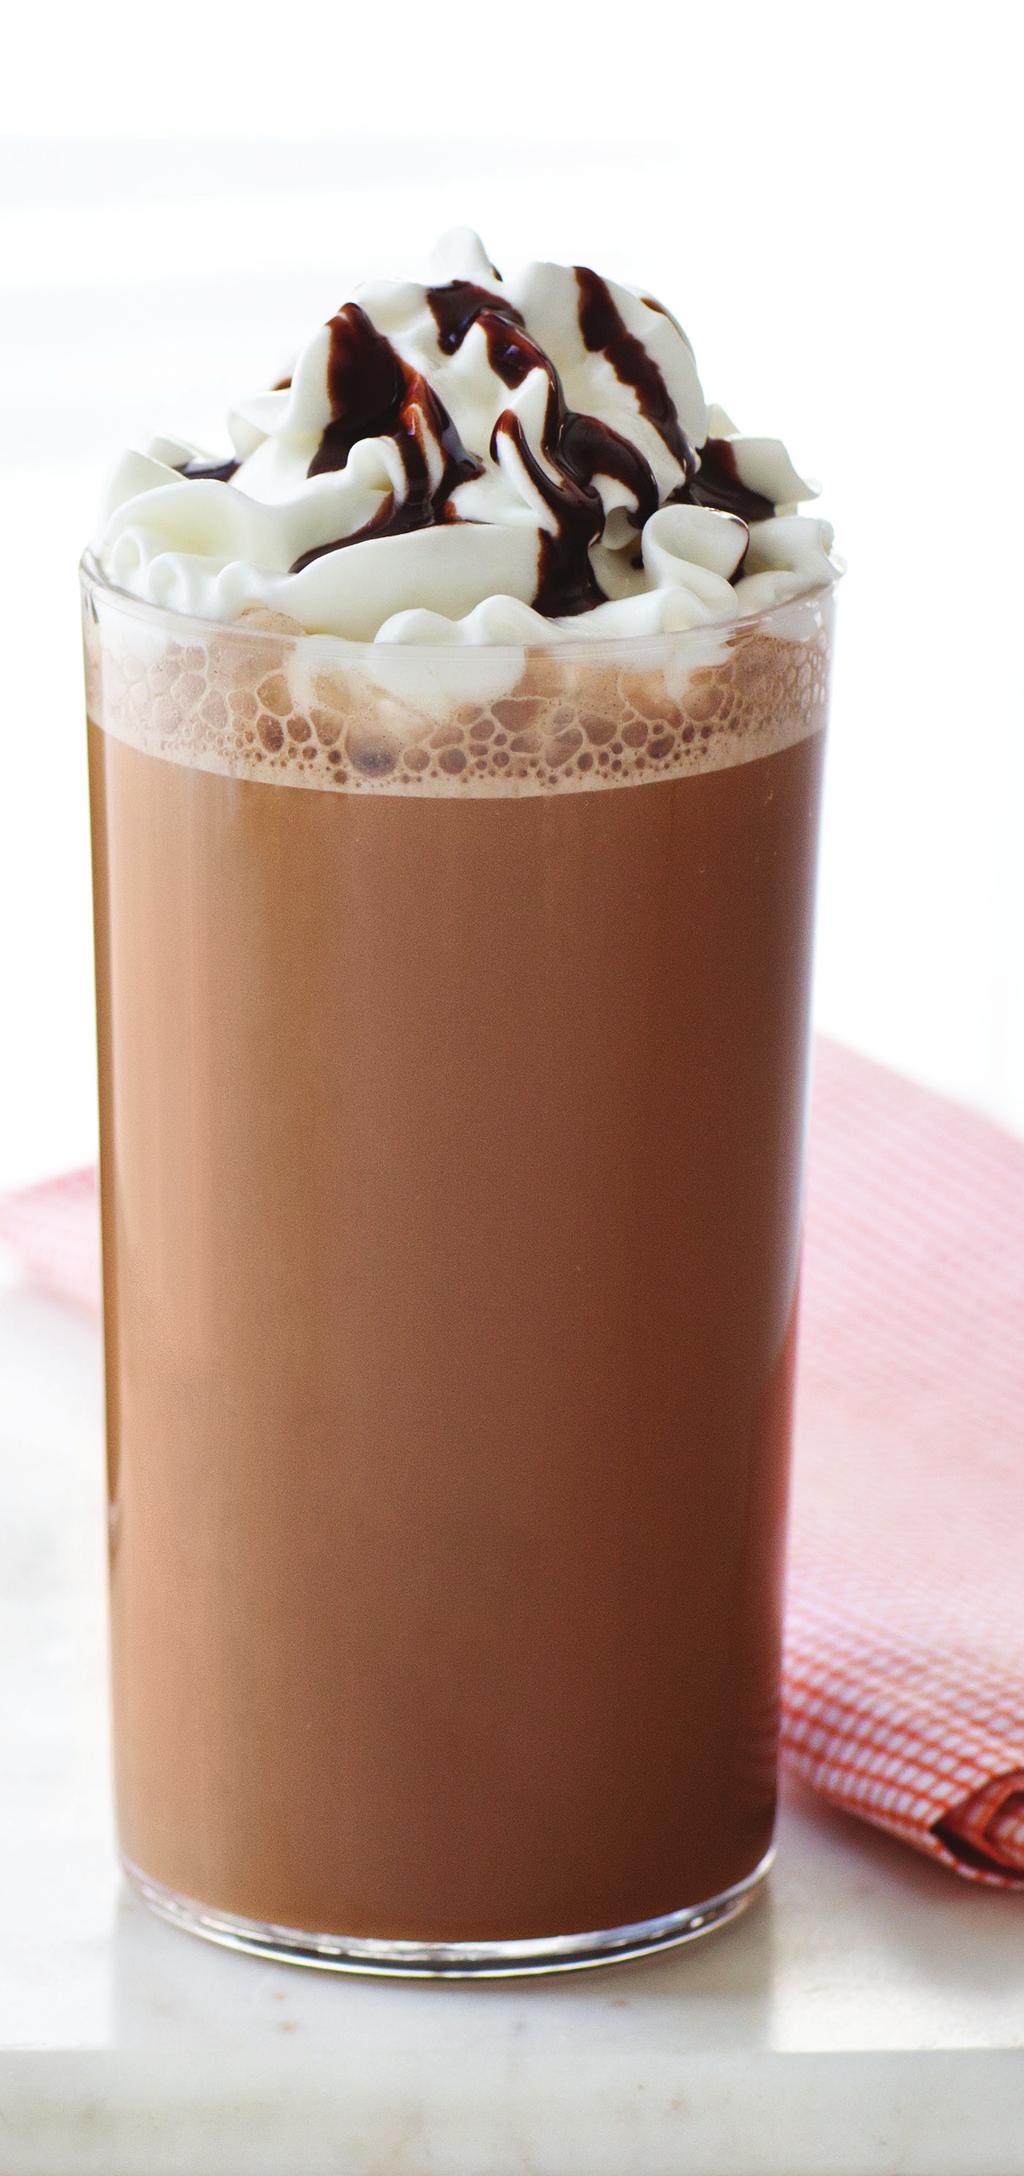 COLD Makes: 2 (0-ounce) servings Mocha Ninjaccino ICED/FROZEN SPECIALTY 3 cups ice 4 cup % milk 4 cup chocolate syrup, plus more for garnish Whipped cream, for garnish.